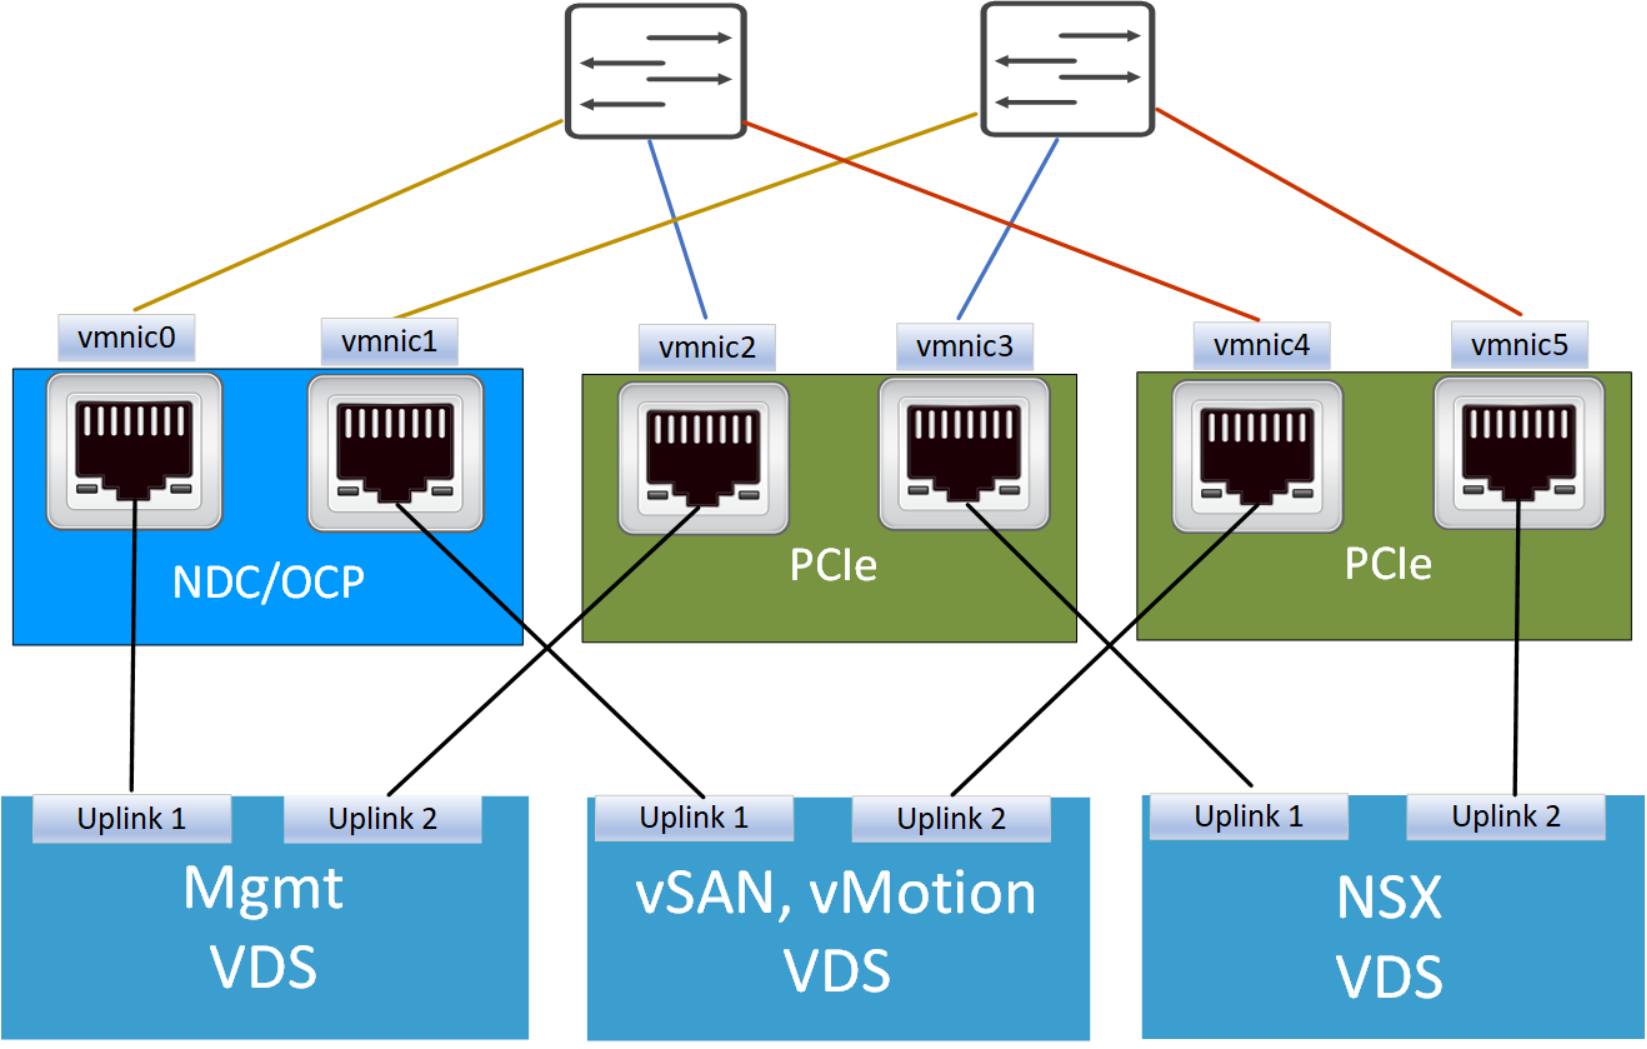 This picture shows connectivity options for VxRail nodes with 6 NICs and 3 VDSs.